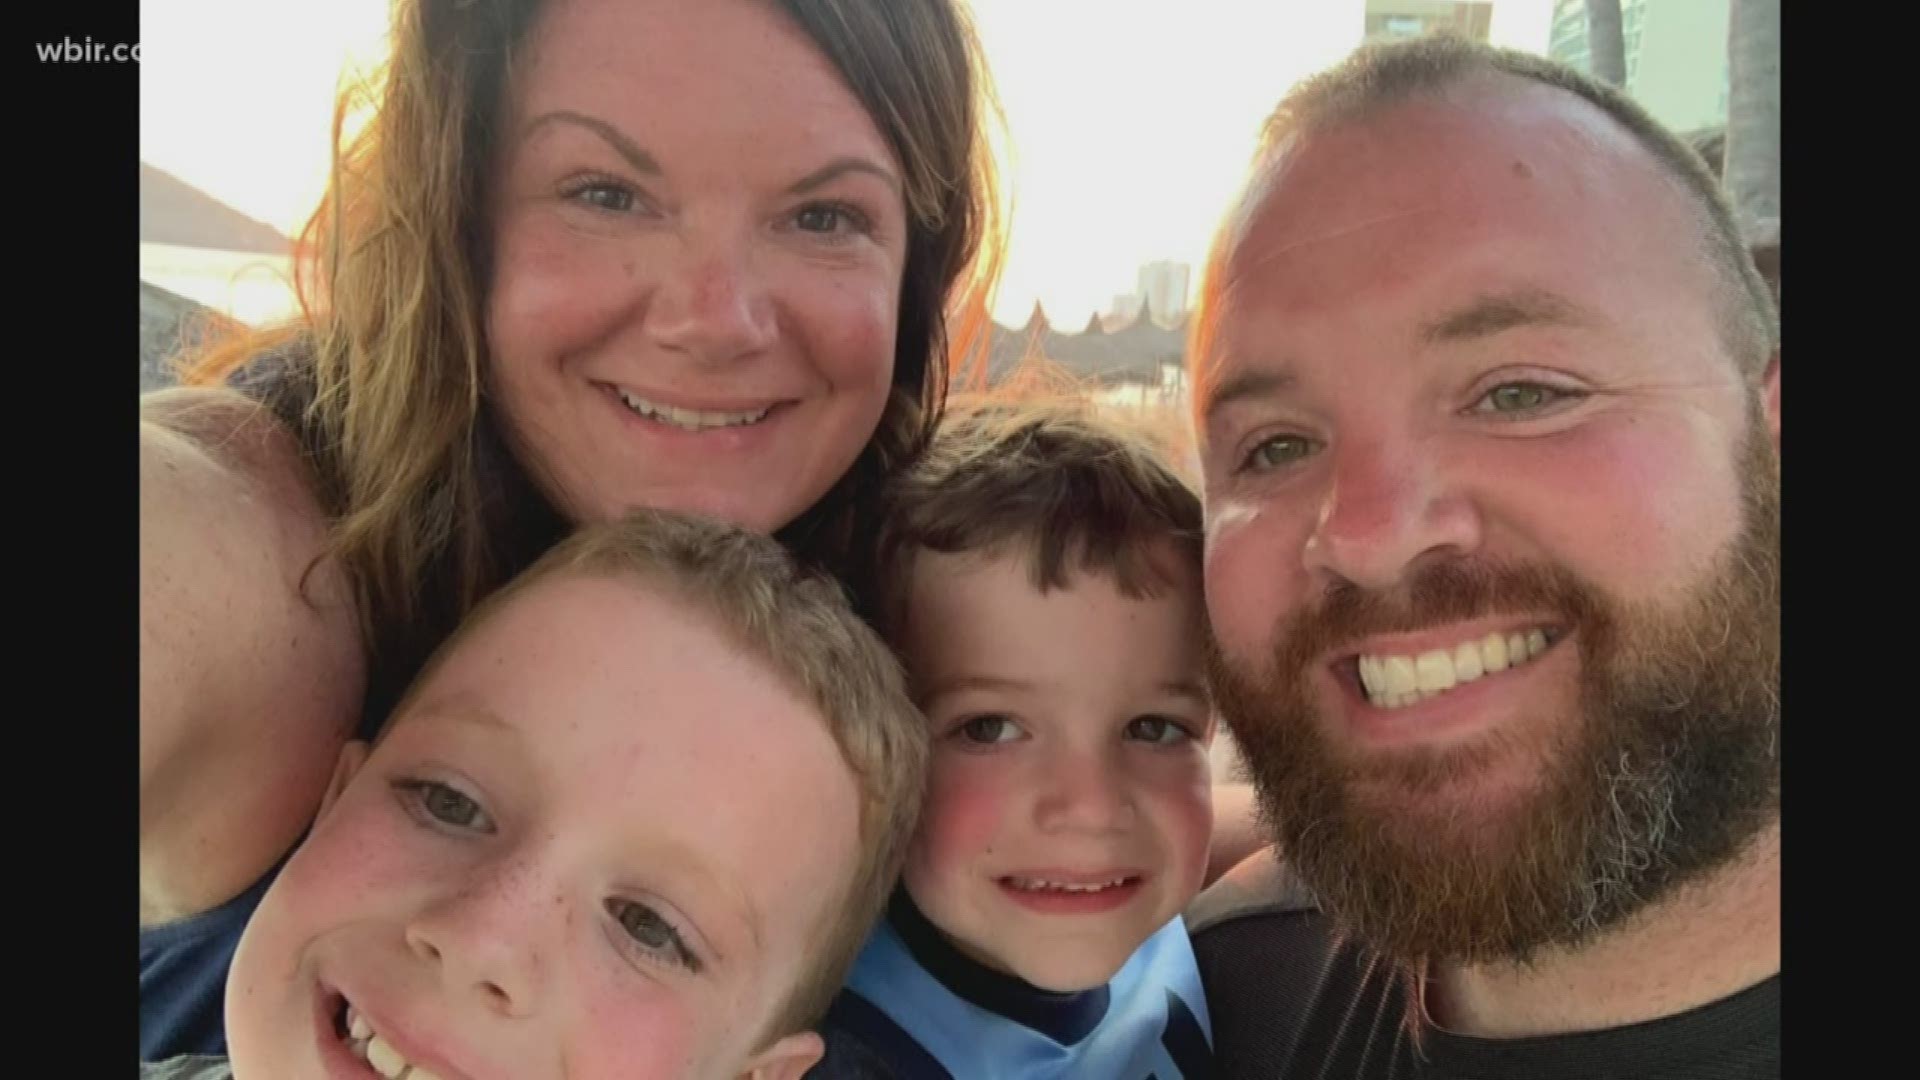 The Moore's will get a break for the Garth Brooks concert thanks to their church family pitching in to care for kids including Jonas, who has cancer. 11/13/2019-4pm.